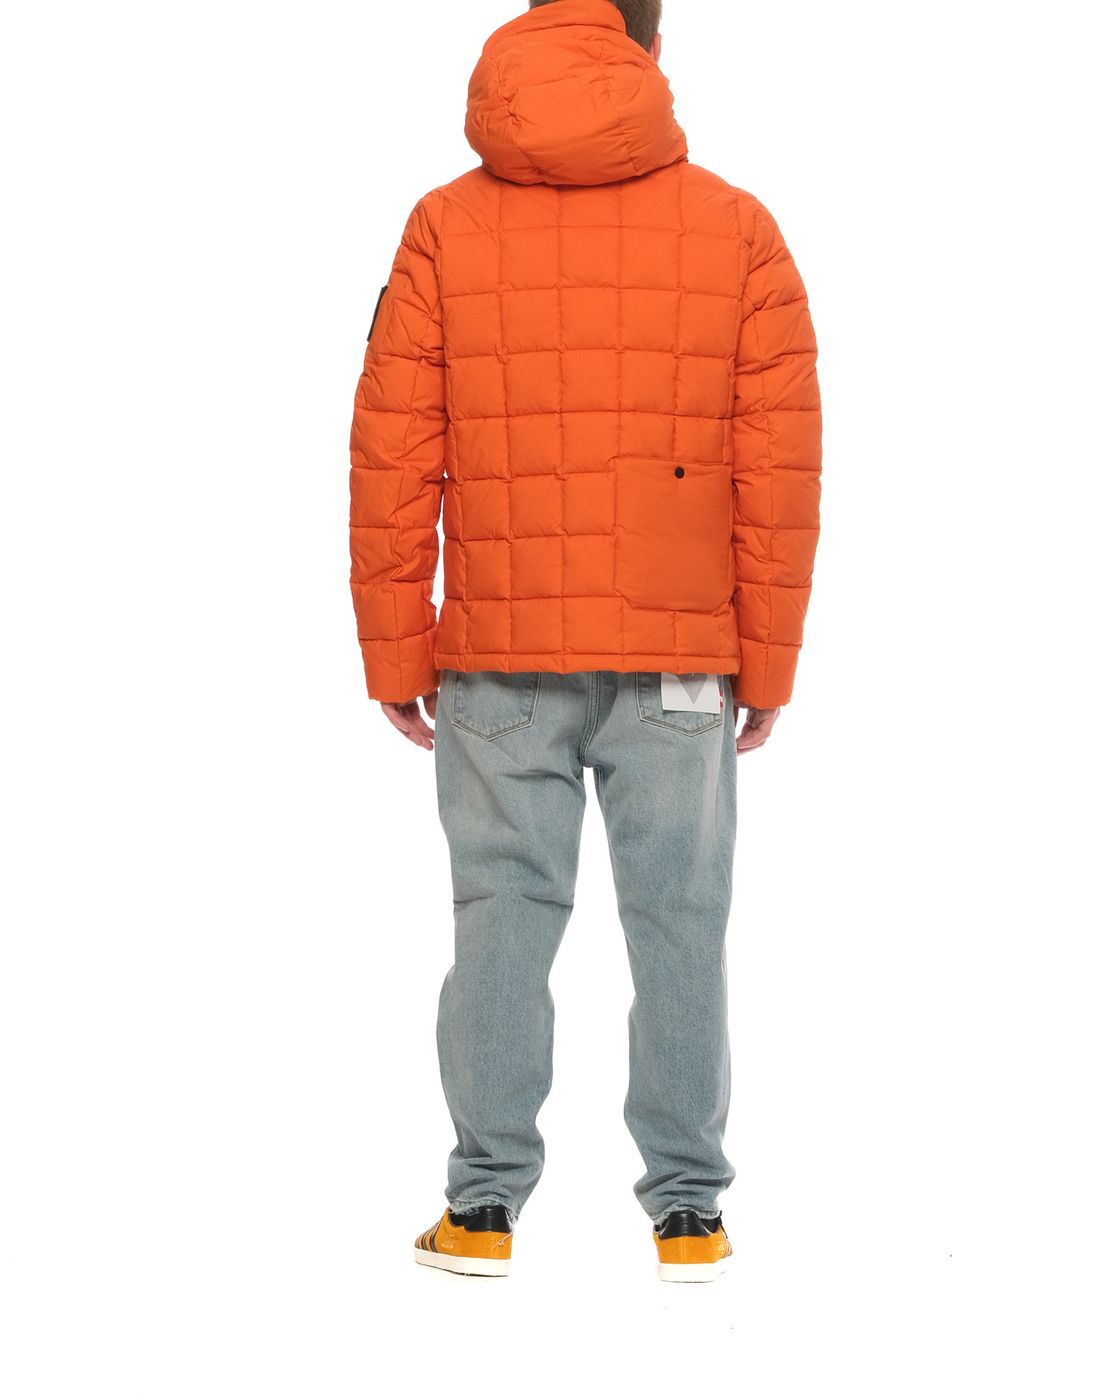 Jacket for man IOTM590AD34-RD 382 ORANGE OUTHERE